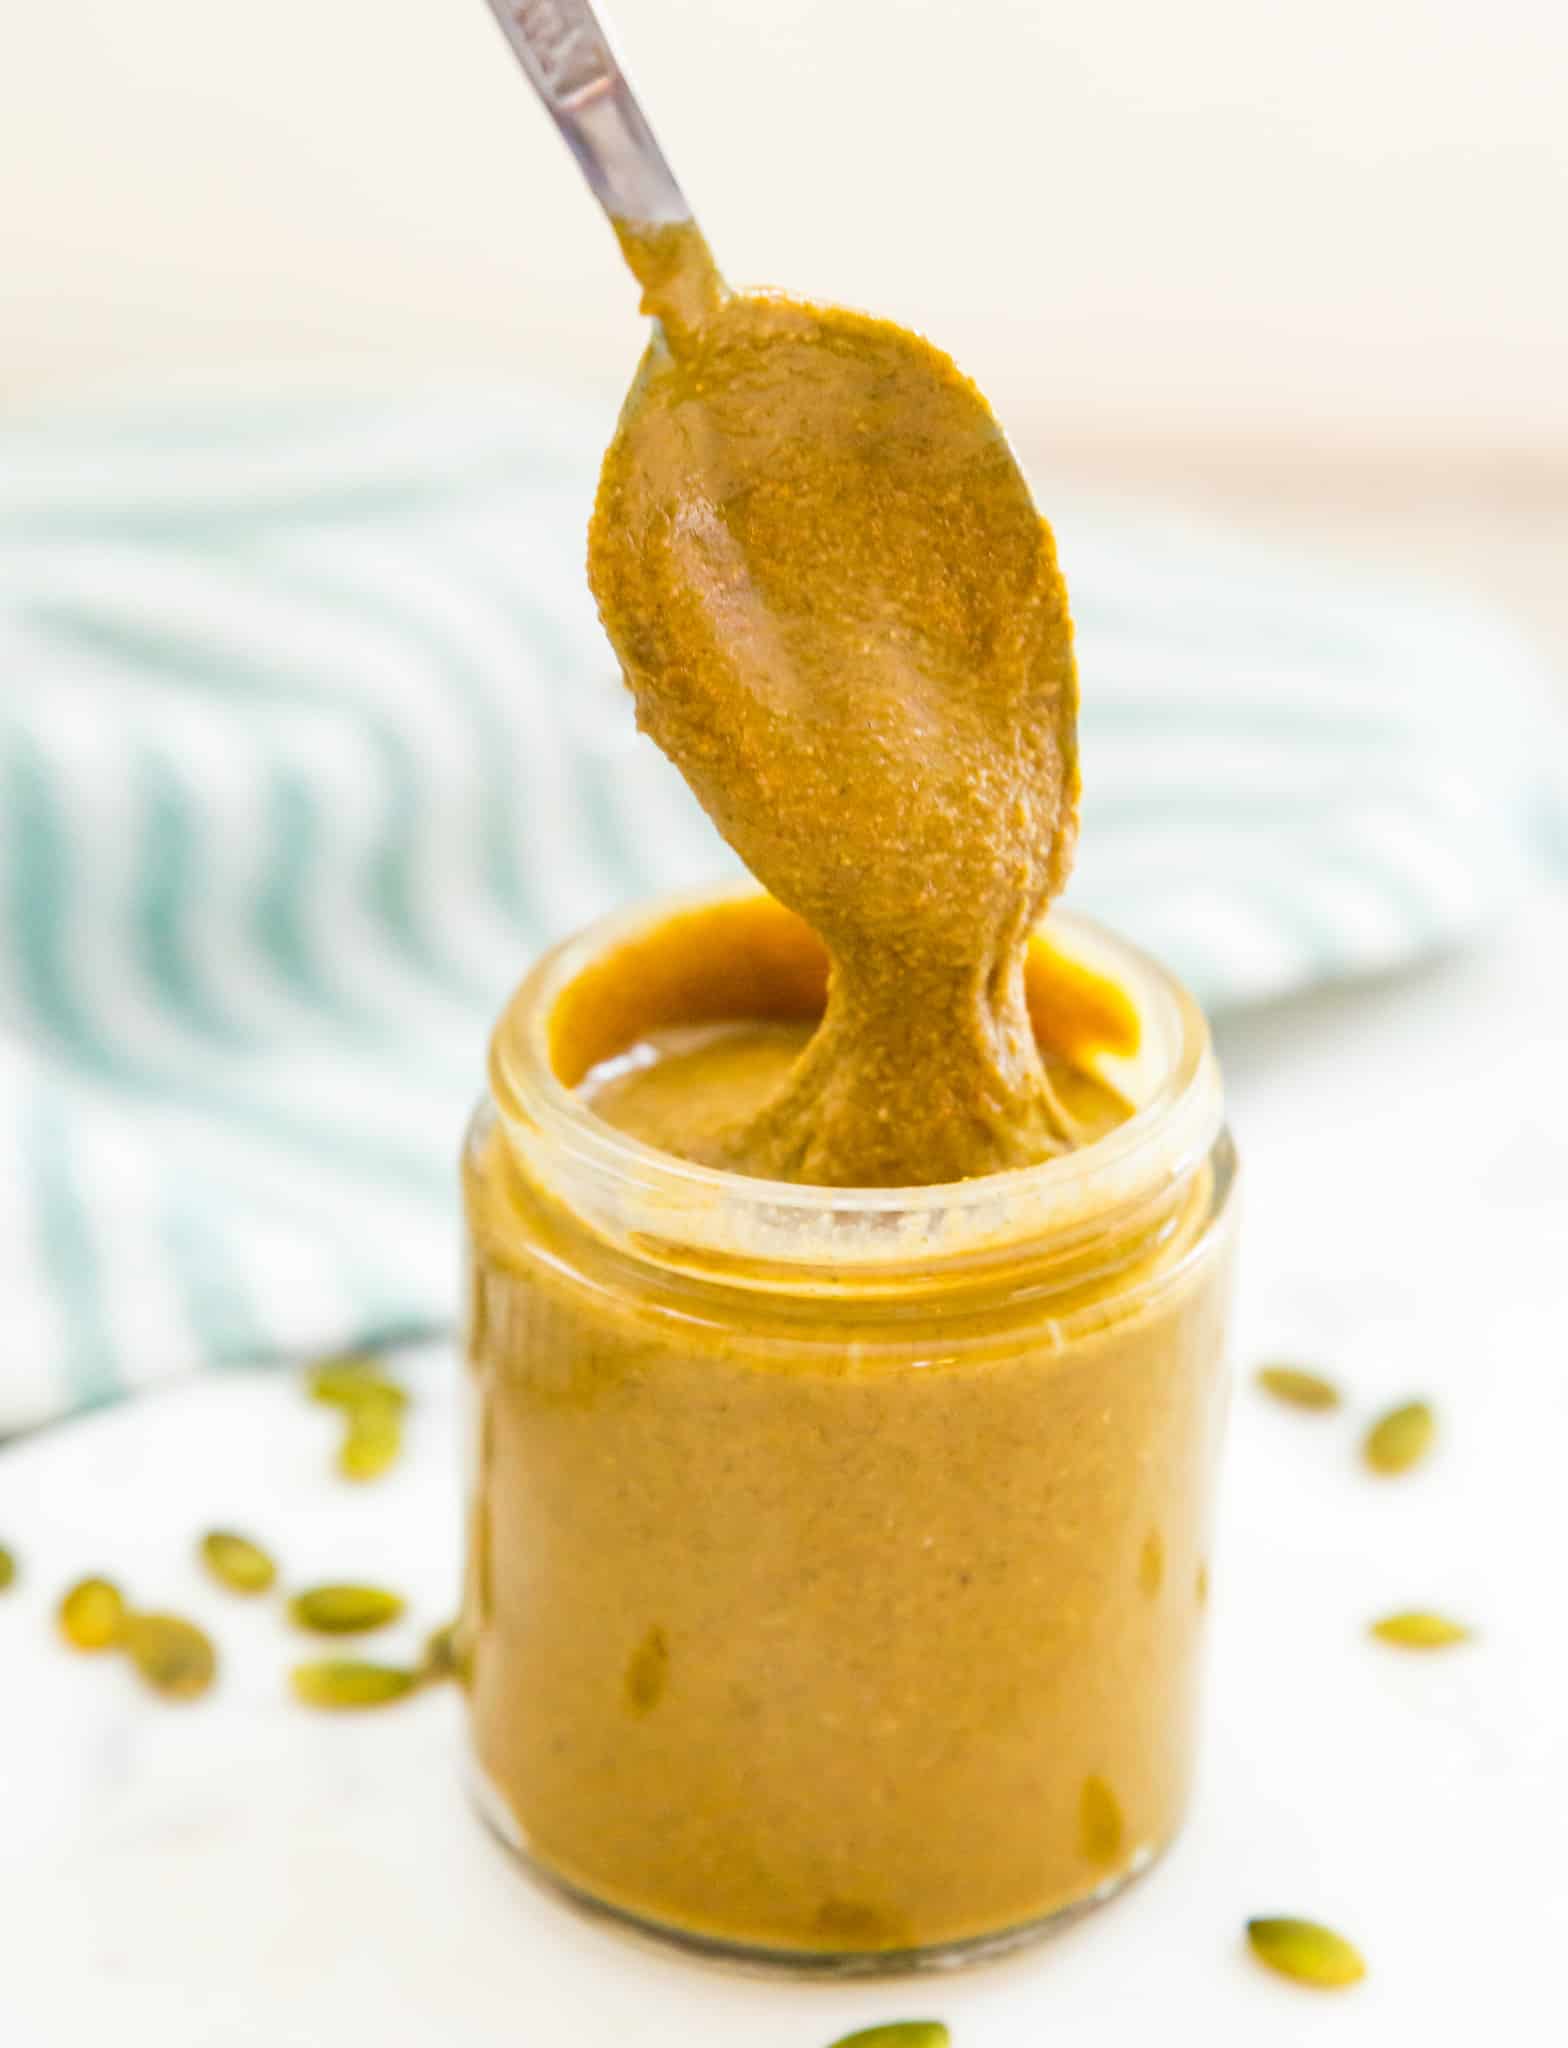 A jar of homemade pumpkin seed butter with a spoon in it.